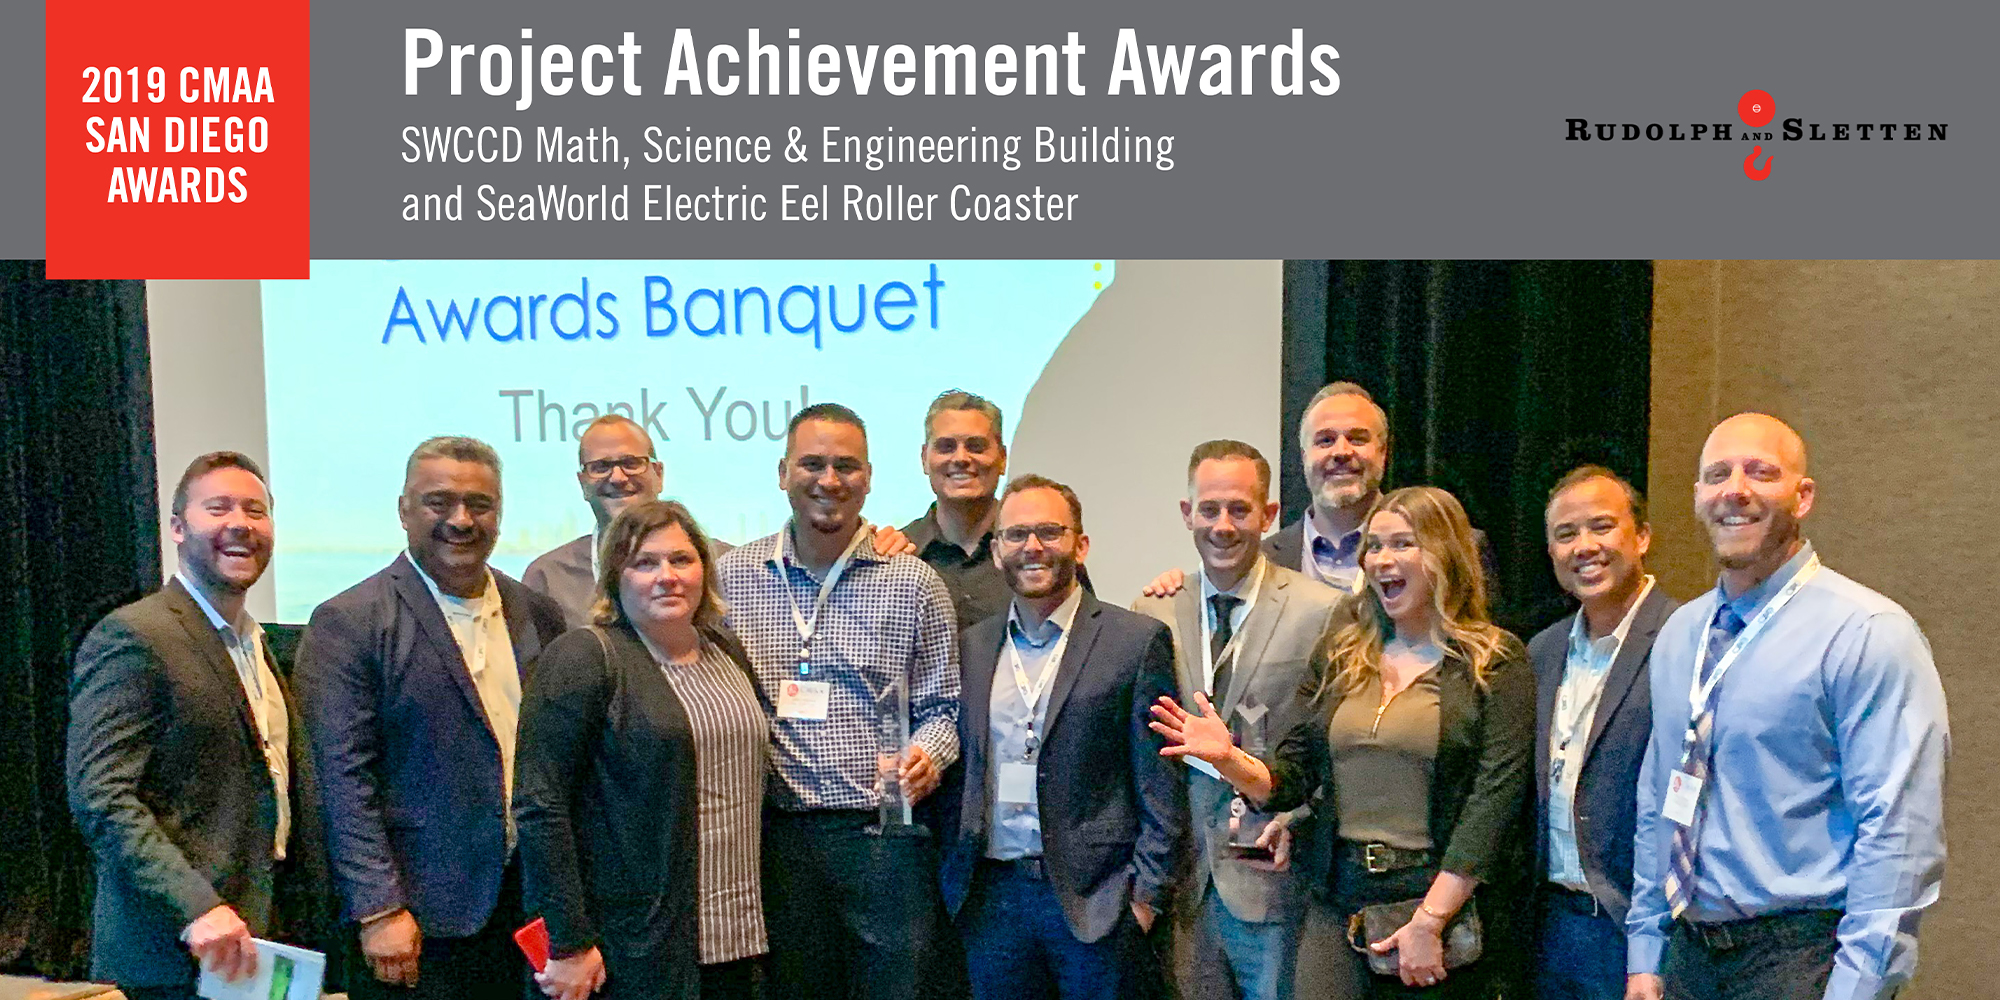 San Diego Region Projects Honored at CMAA Awards